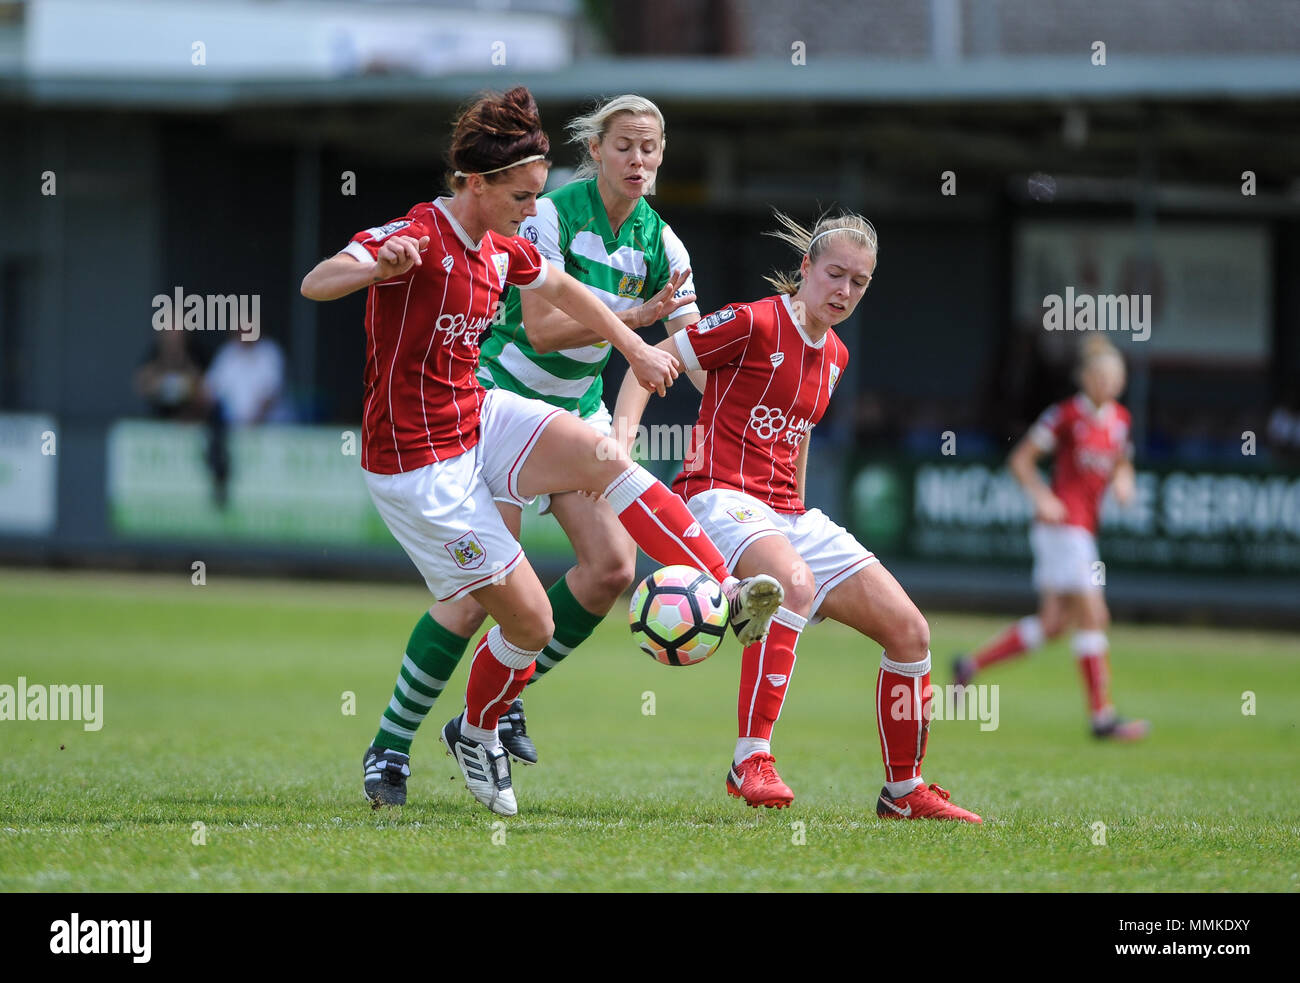 Taunton, England. 12th May 2018.  Kelly Aldridge of Yeovil competes with Jasmine Matthews and Danique Kerkdijk of Bristol during the WSL match between Yeovil Town Ladies FC and Bristol City Women FC at The Viridor Stadium. © David Partridge / Alamy Live News Stock Photo